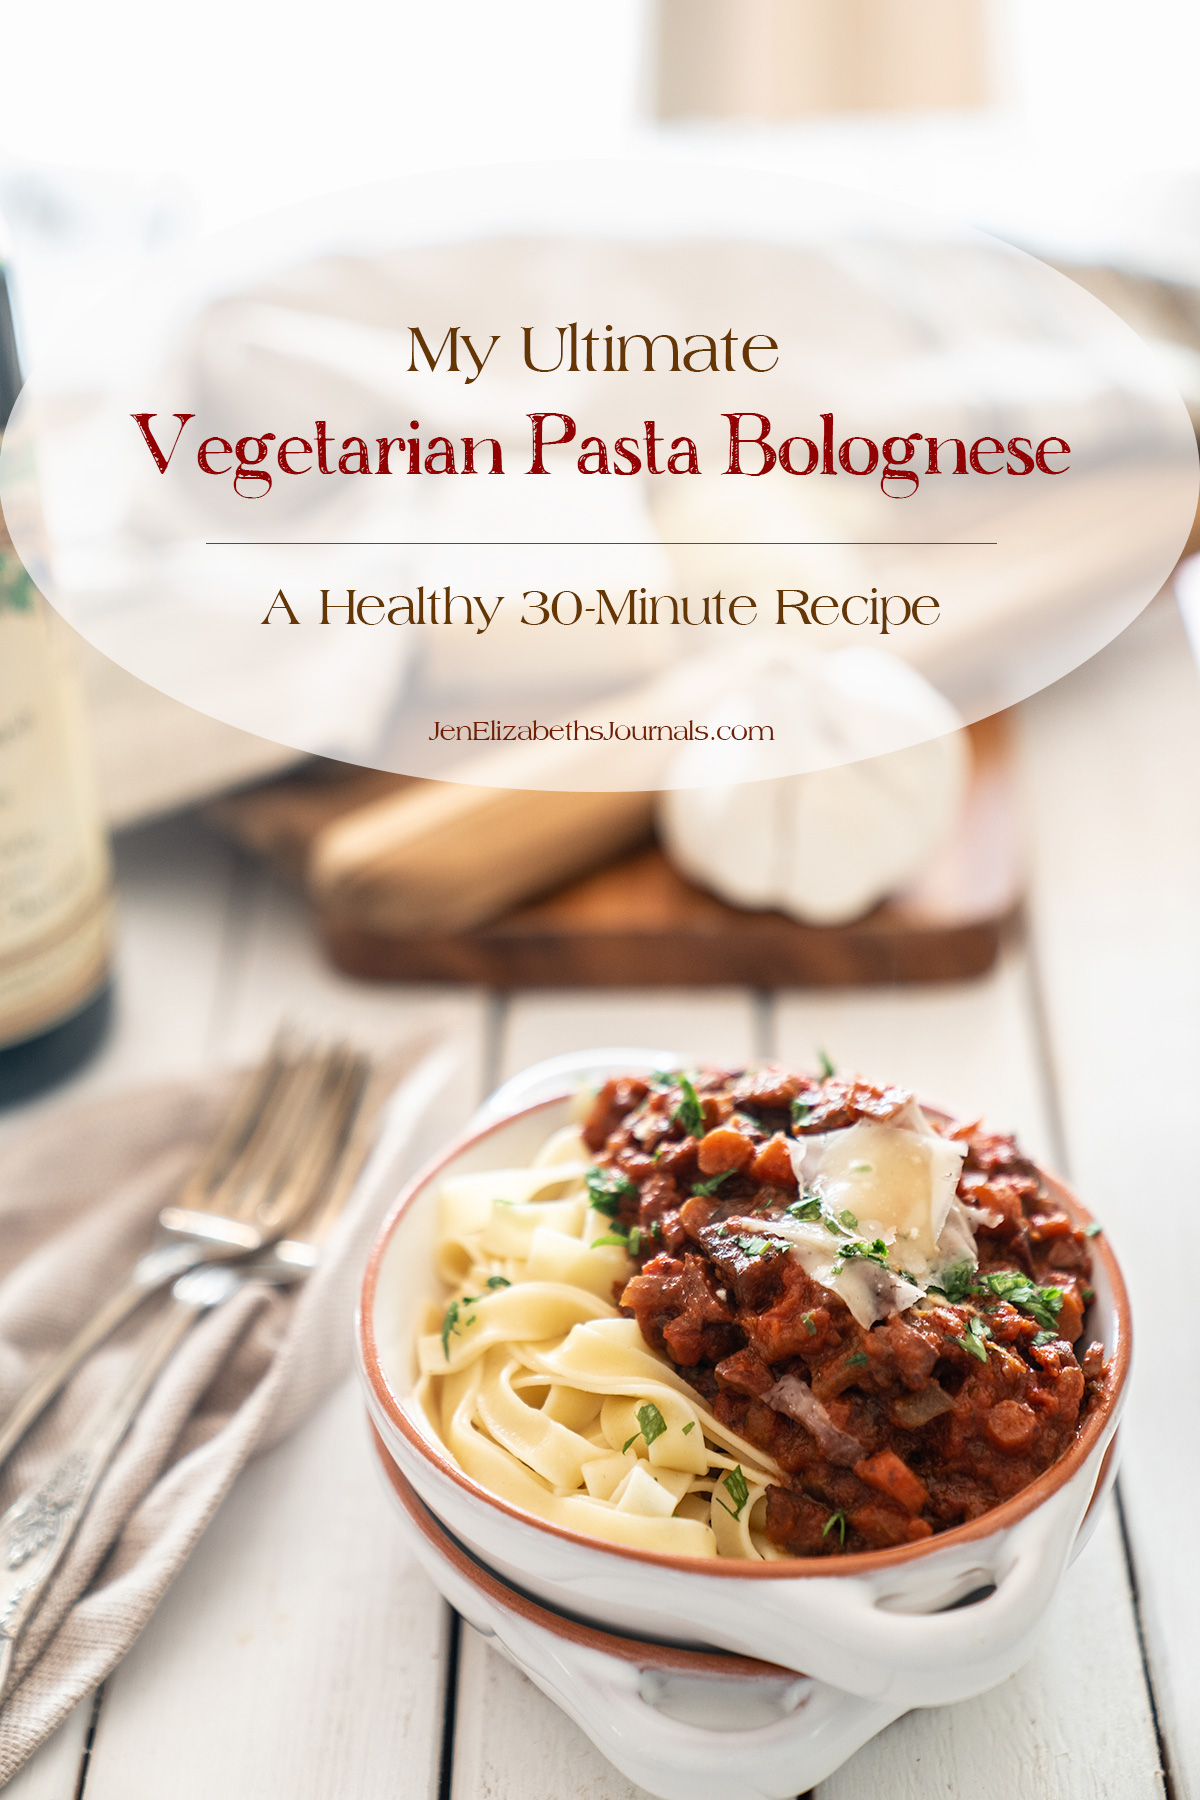 My-Ultimate-Vegetarian-Pasta-Bolognese-A-Healthy-30-Minute-Recipe